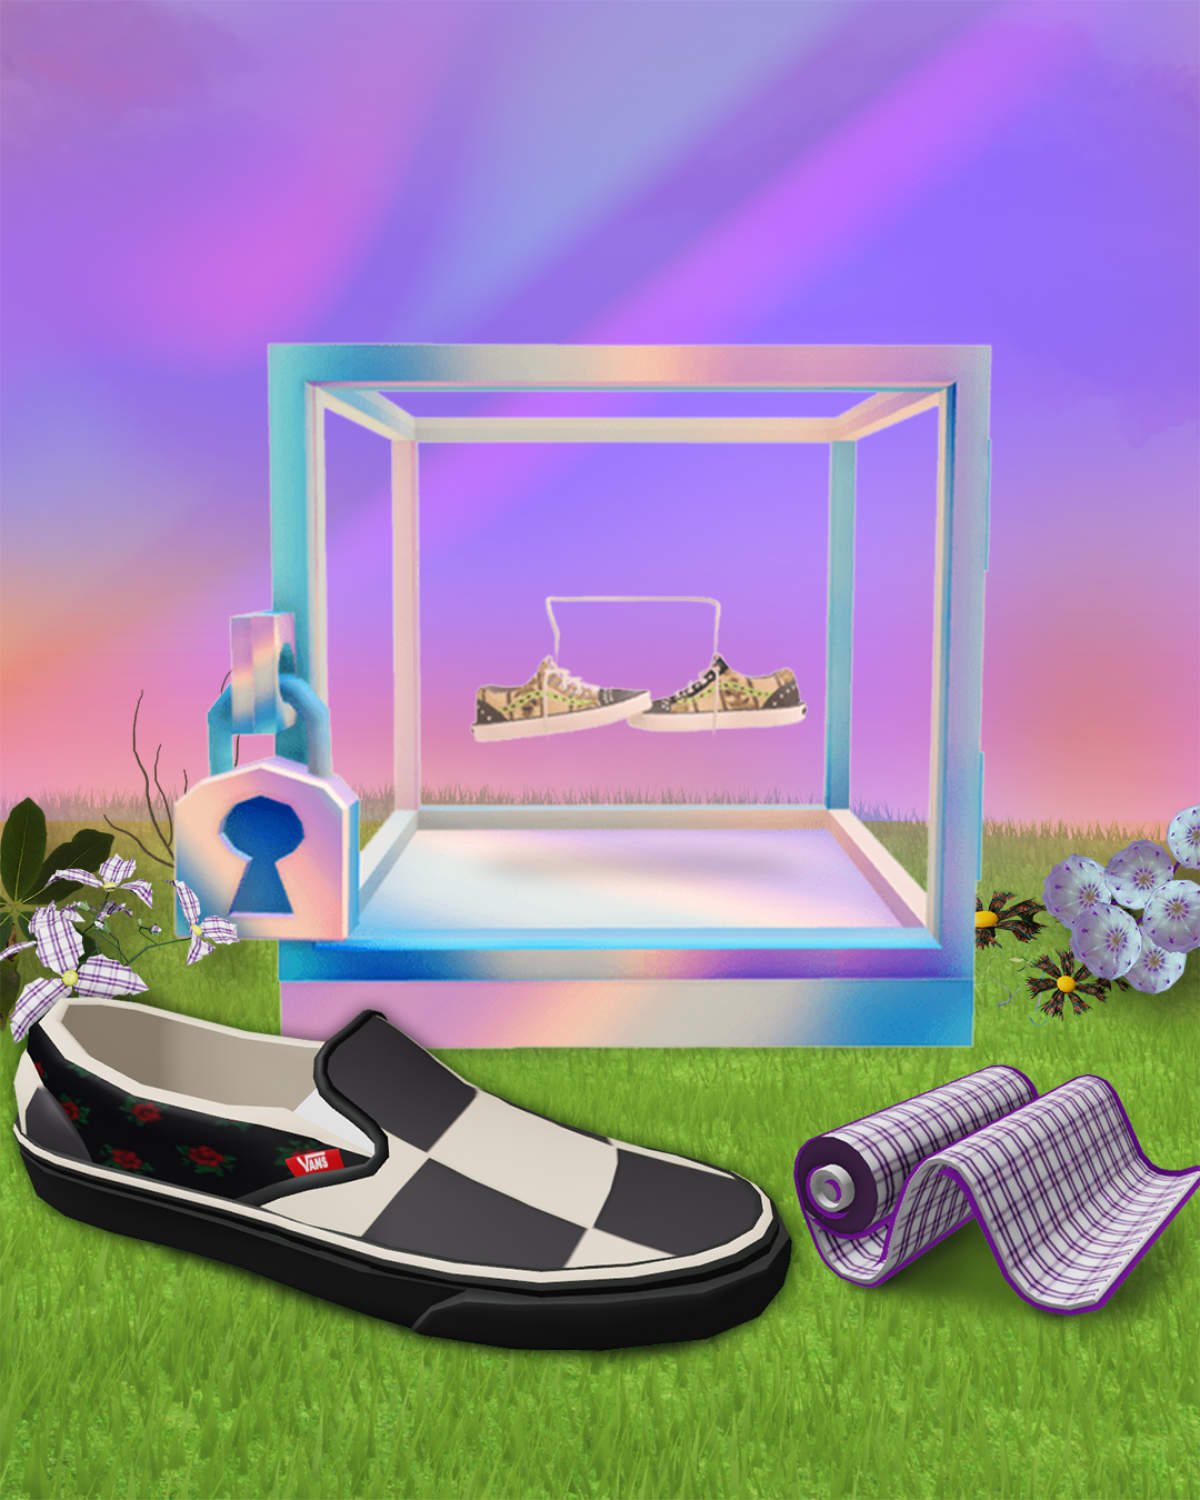 Gucci Town And Vans World Launch First Collaboration Across Their Roblox Worlds